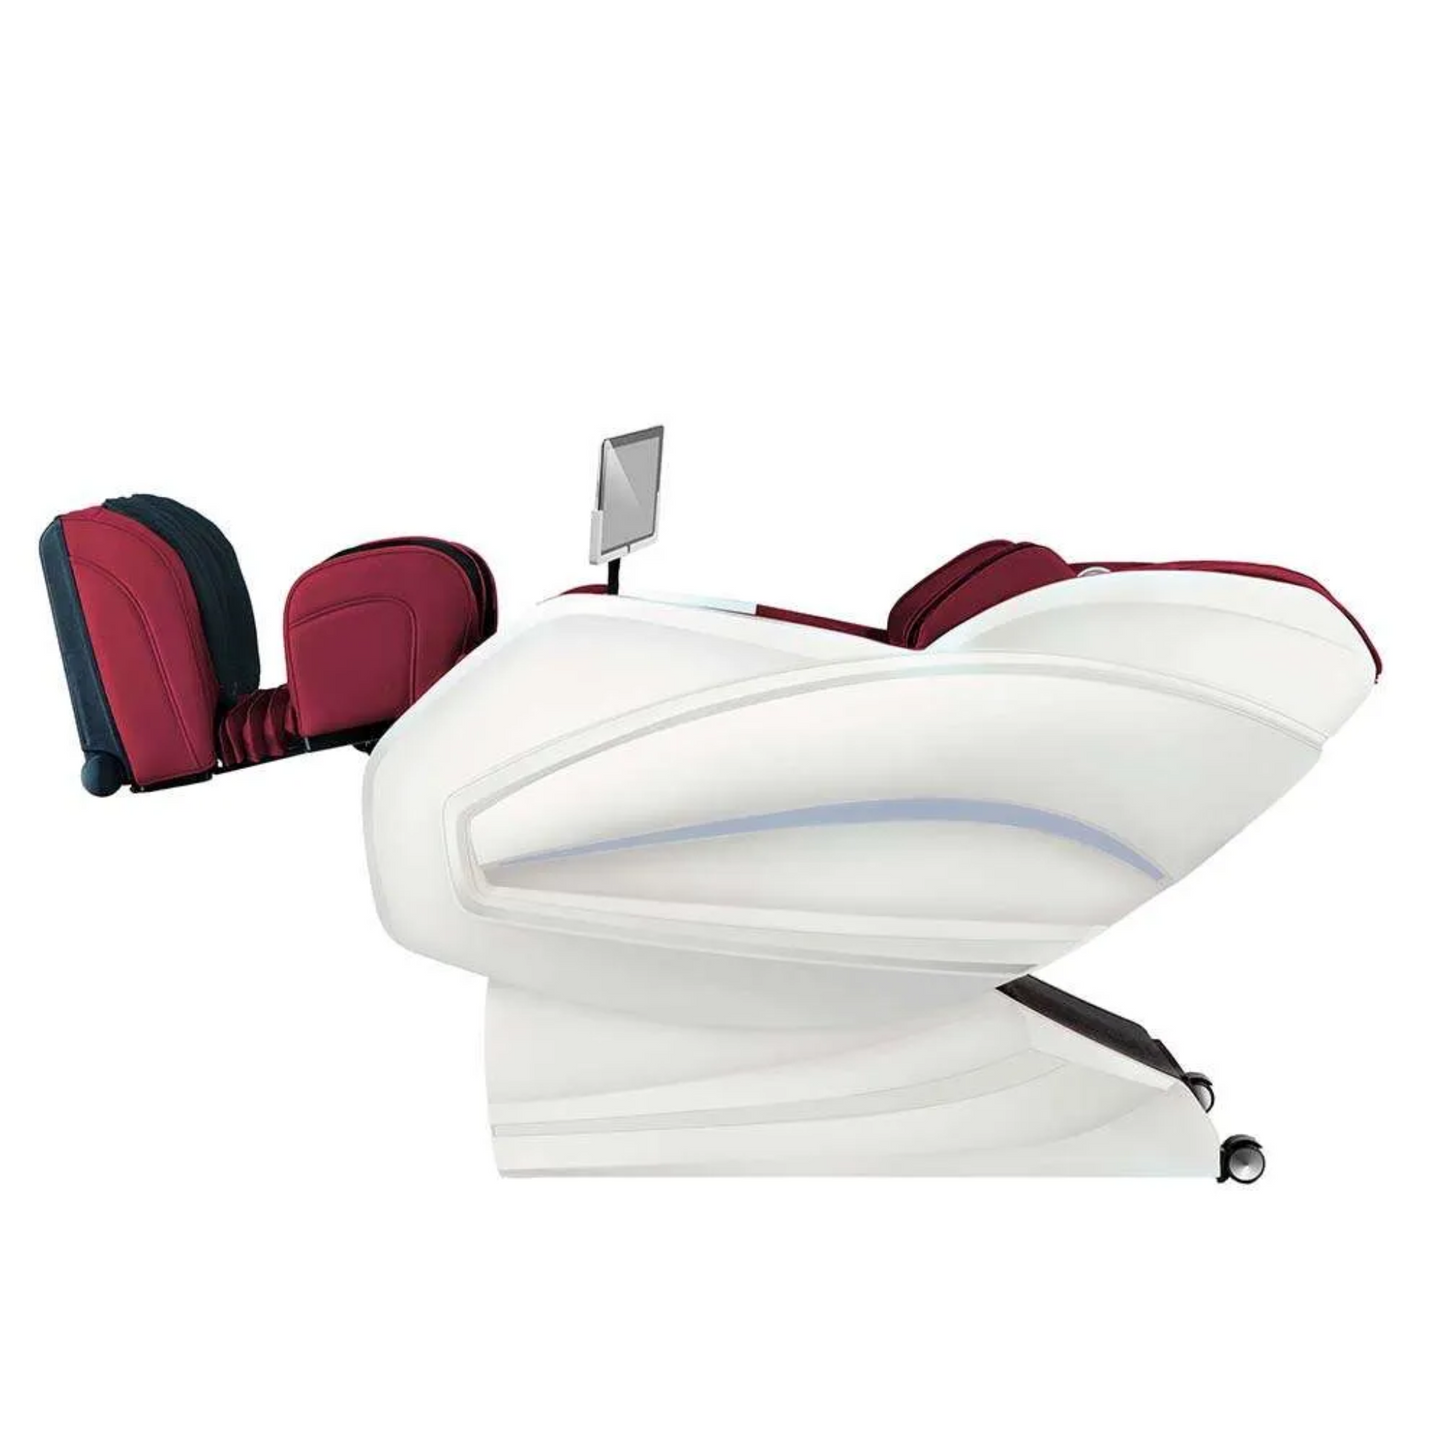 10 Series Royal Queen 5D AI Ultimate Massage Chair